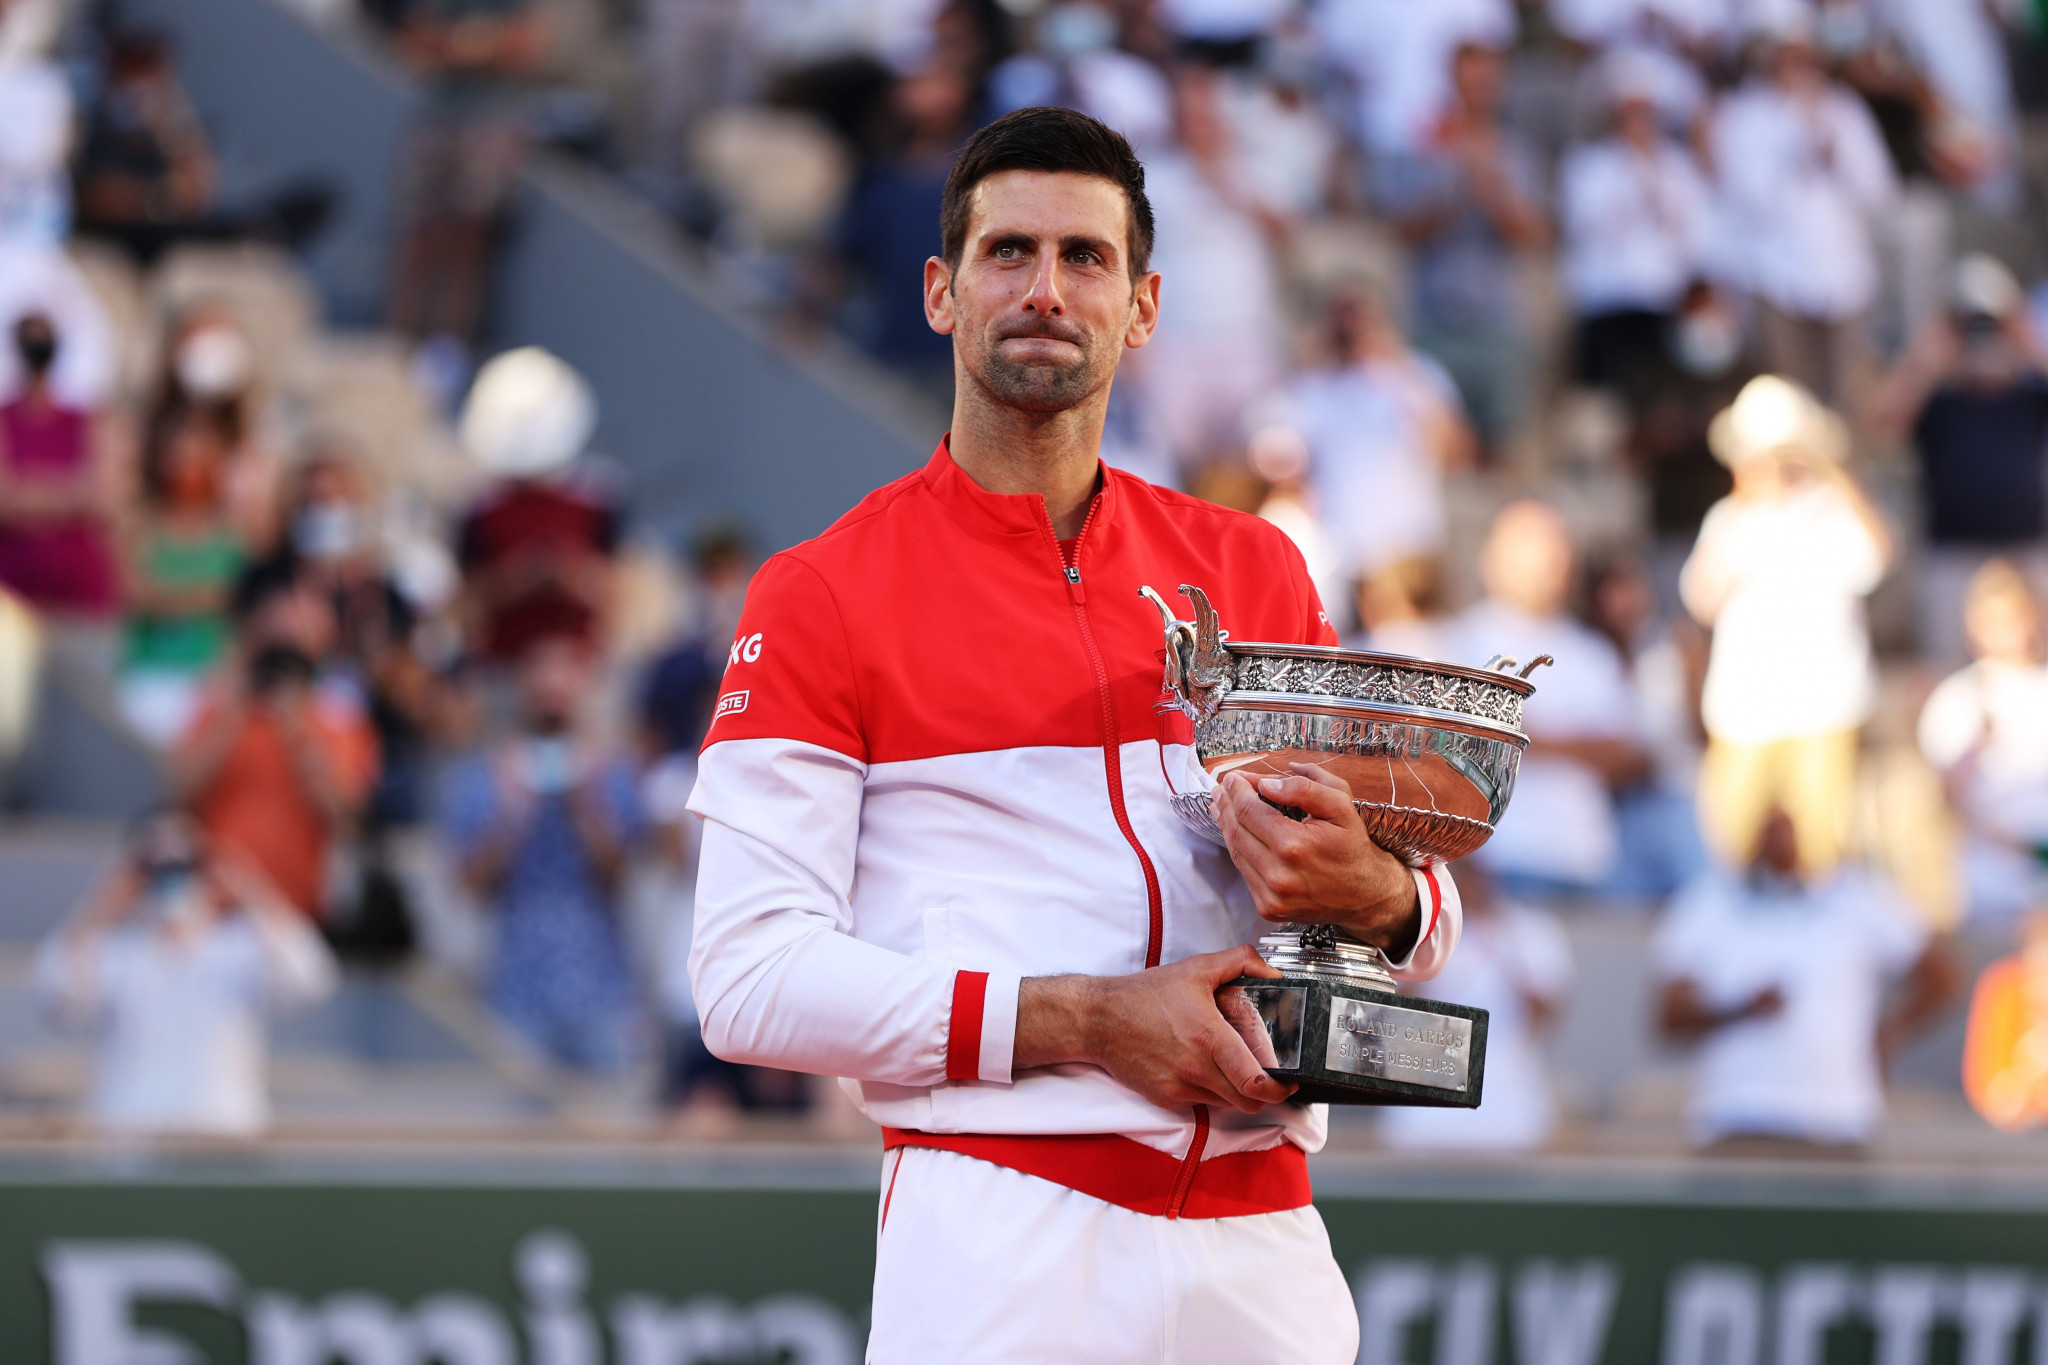 Novak Djokovic is the defending men's singles champion as he looks to equal Rafael Nadal's record of 21 Grand Slam crowns ©Getty Images